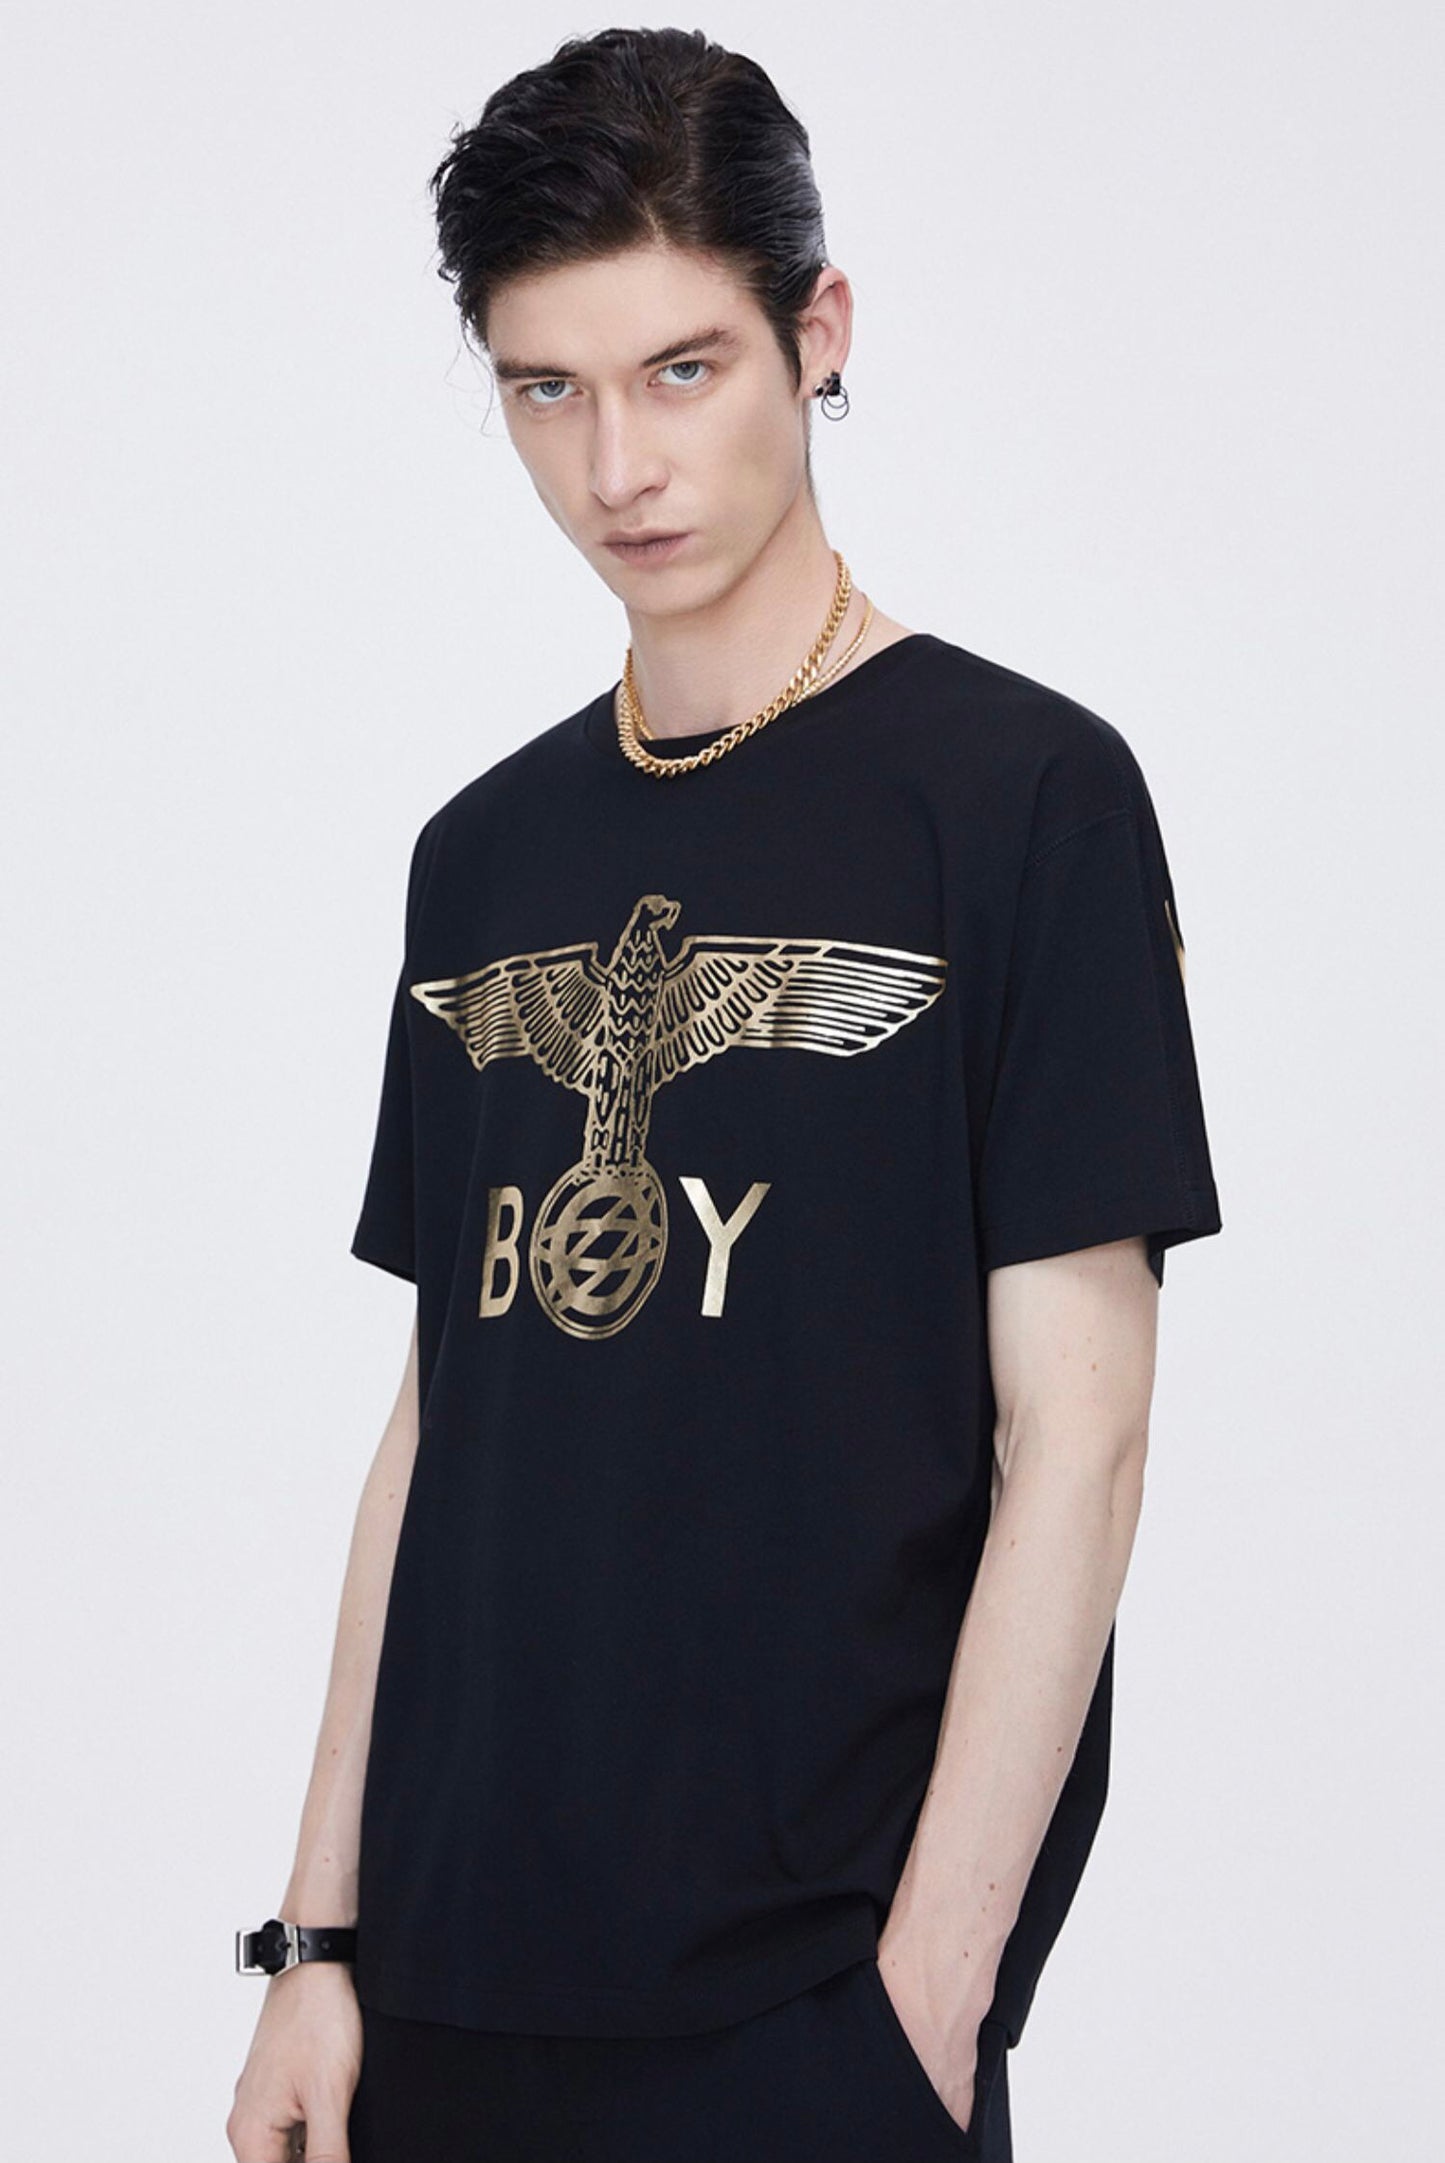 Boy London Eagle Backside Wording Tee - Shop Streetwear, Sneakers, Slippers and Gifts online | Malaysia - The Factory KL